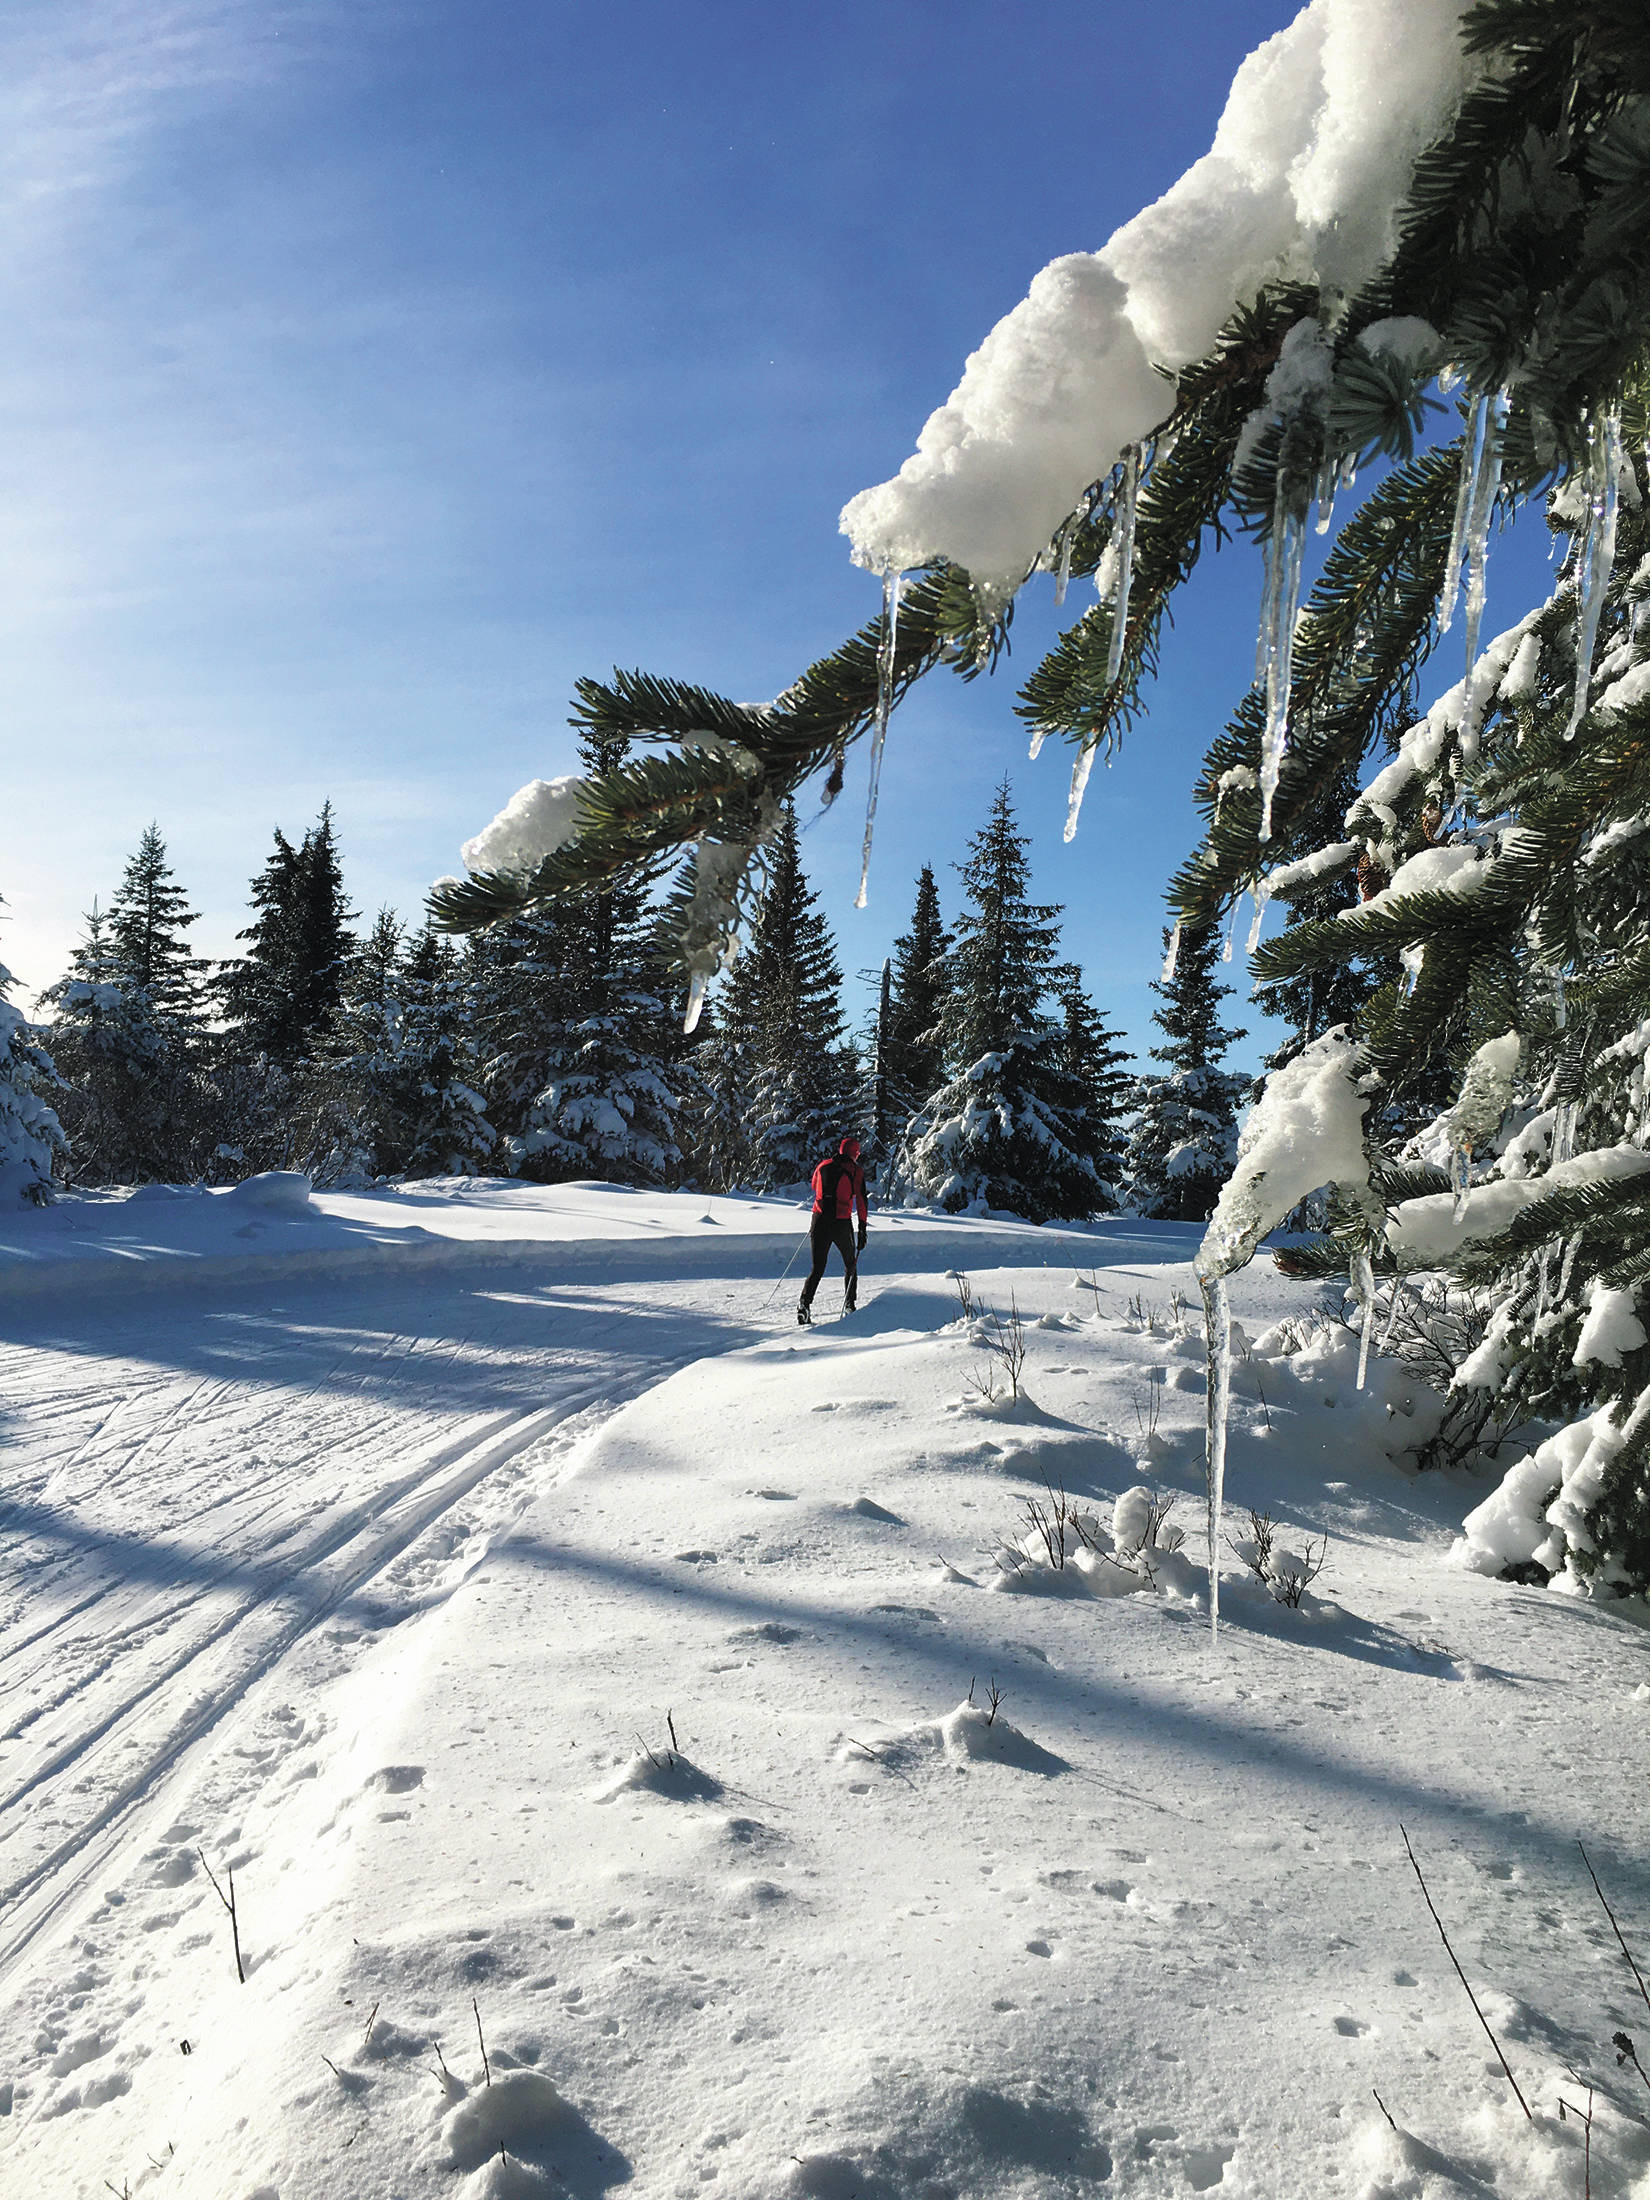 A skier enjoys the hayfield loop of the Lookout Mountain Trails on Feb. 24, 2020 near Homer, Alaska. (Photo by Megan Pacer/Homer News)